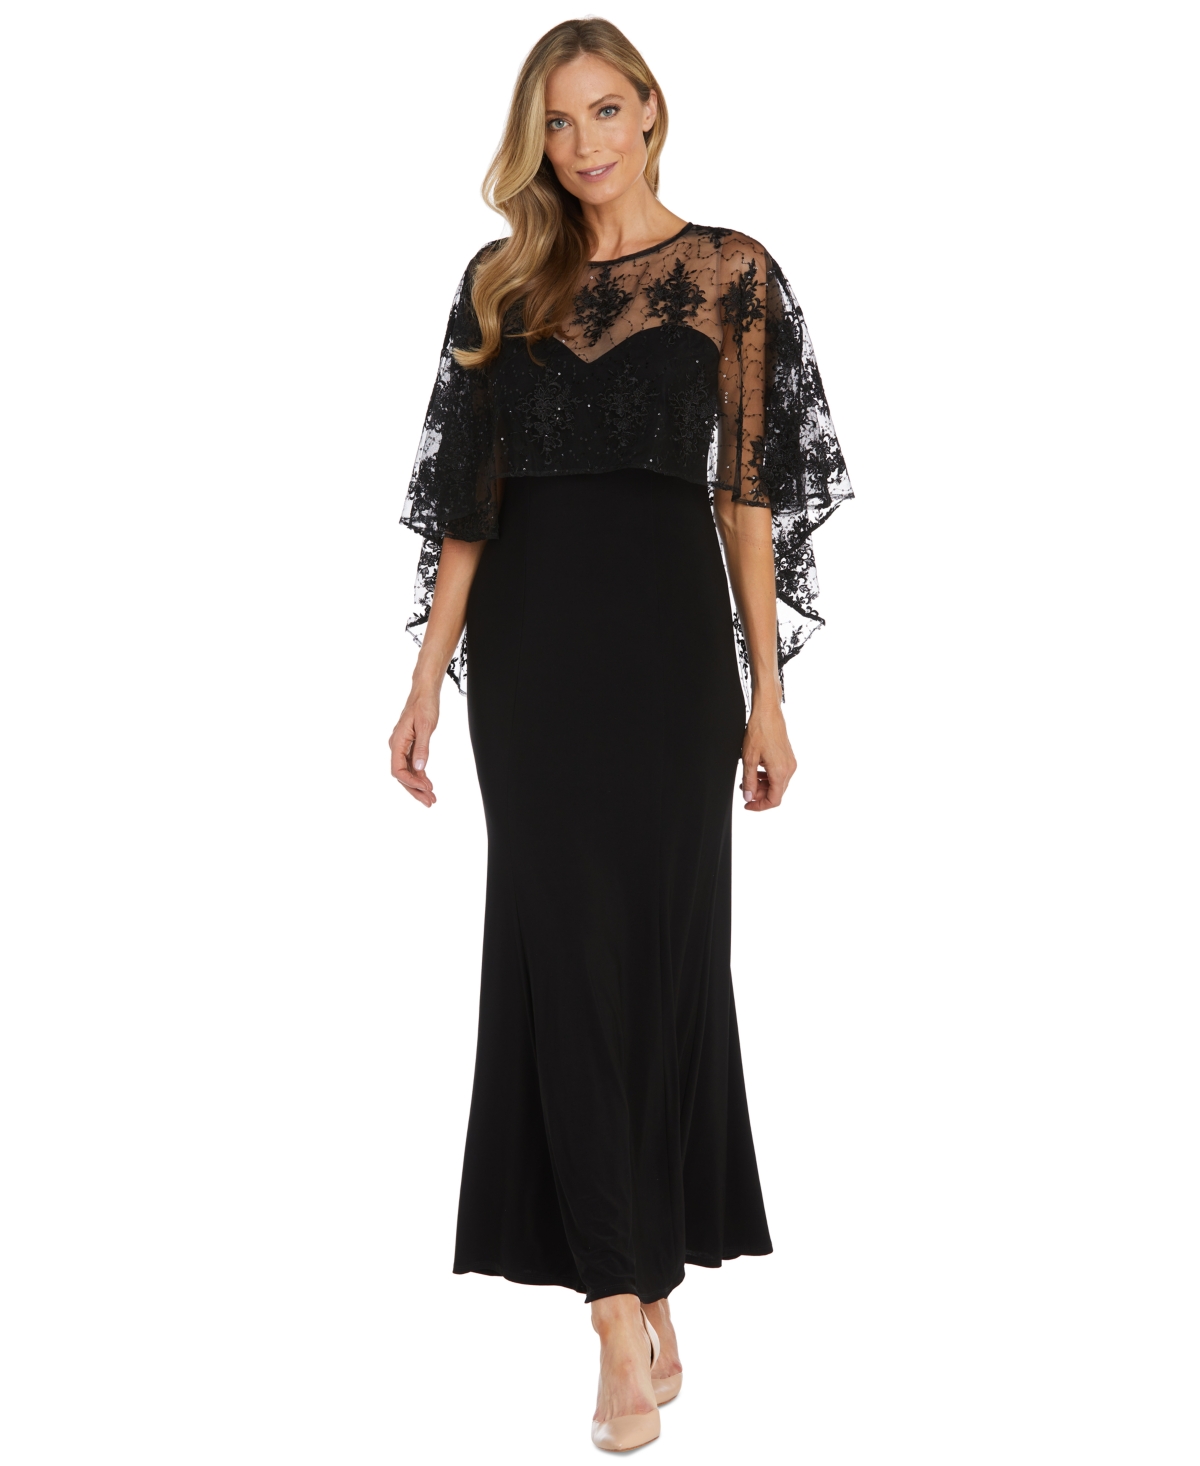 Women's Embellished-Capelet Gown - Black/Taupe